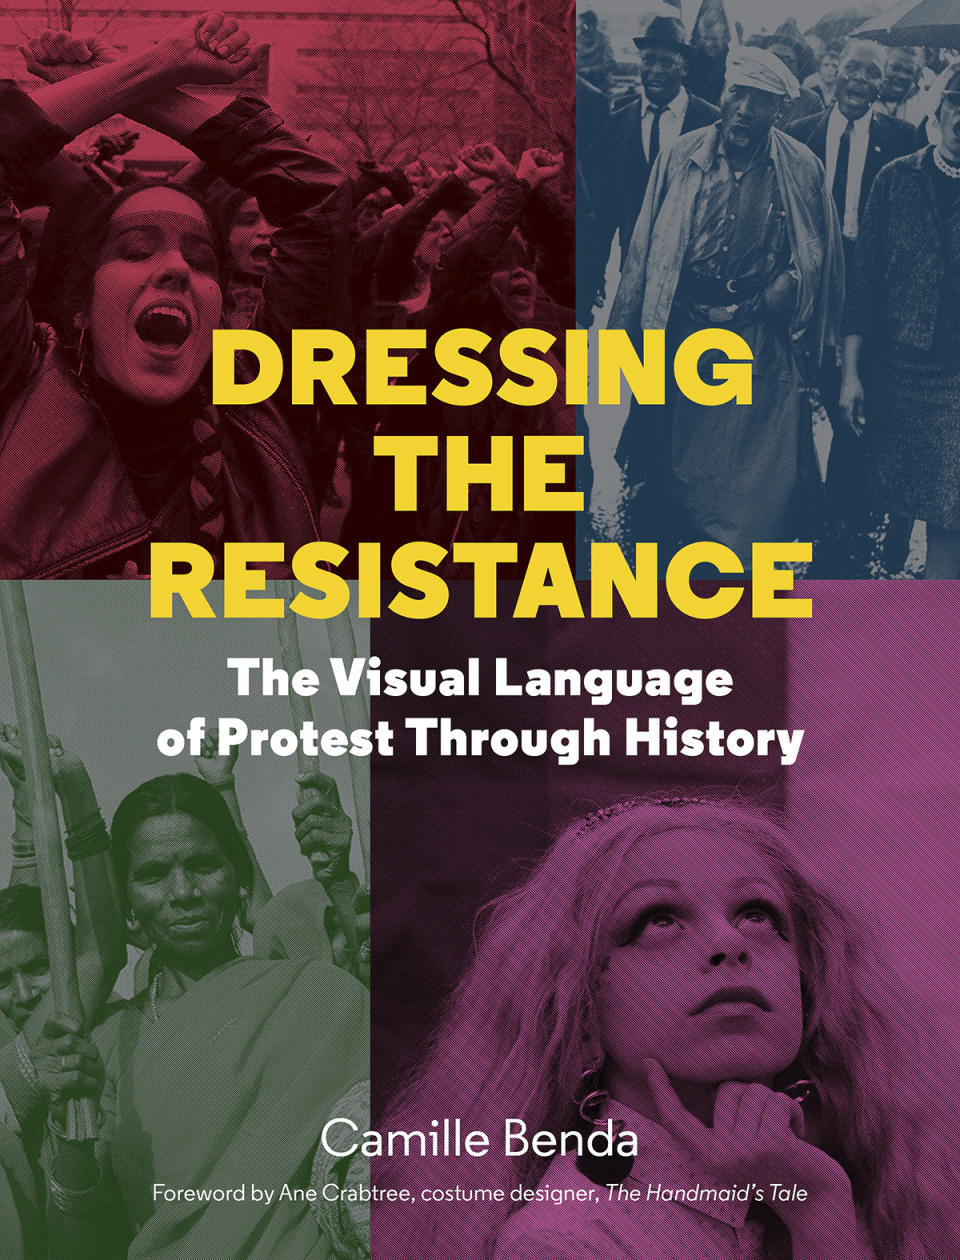 This photo shows the book cover for “Dressing the Resistance: The Visual Language of Protest through History” by Camille Benda. (Princeton Architectural Press via AP)